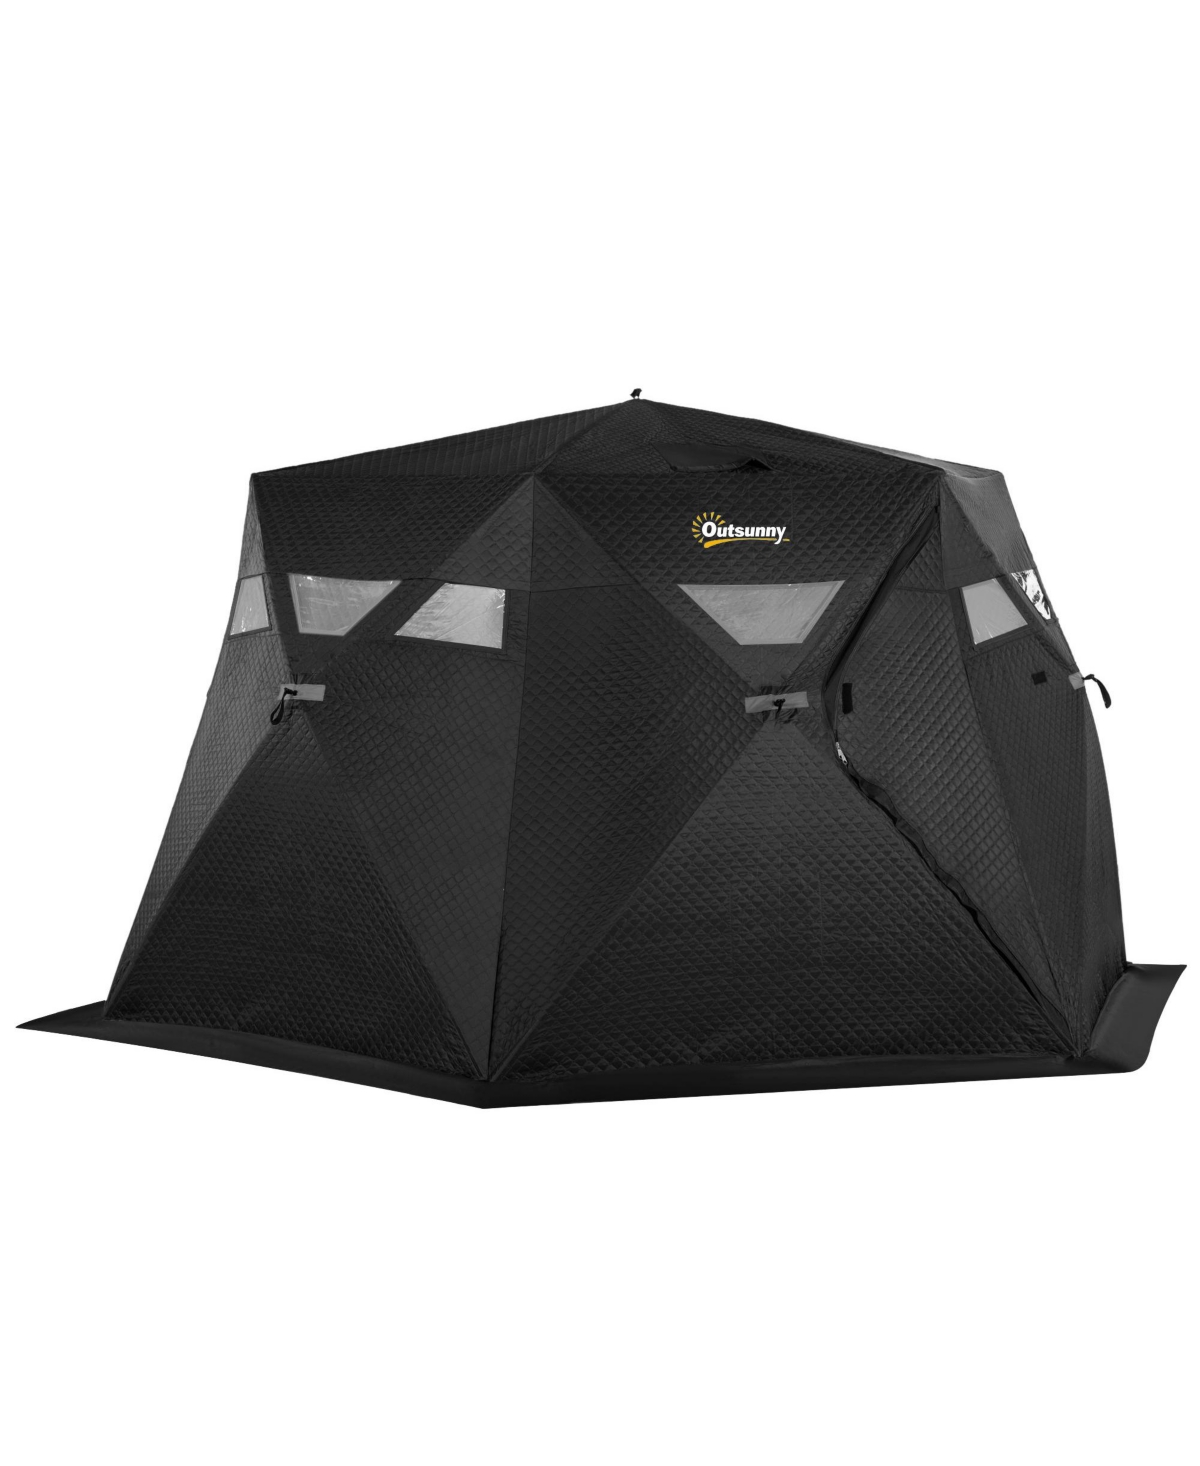 4 Person Insulated Ice Fishing Shelter w/Carry Bag - Black